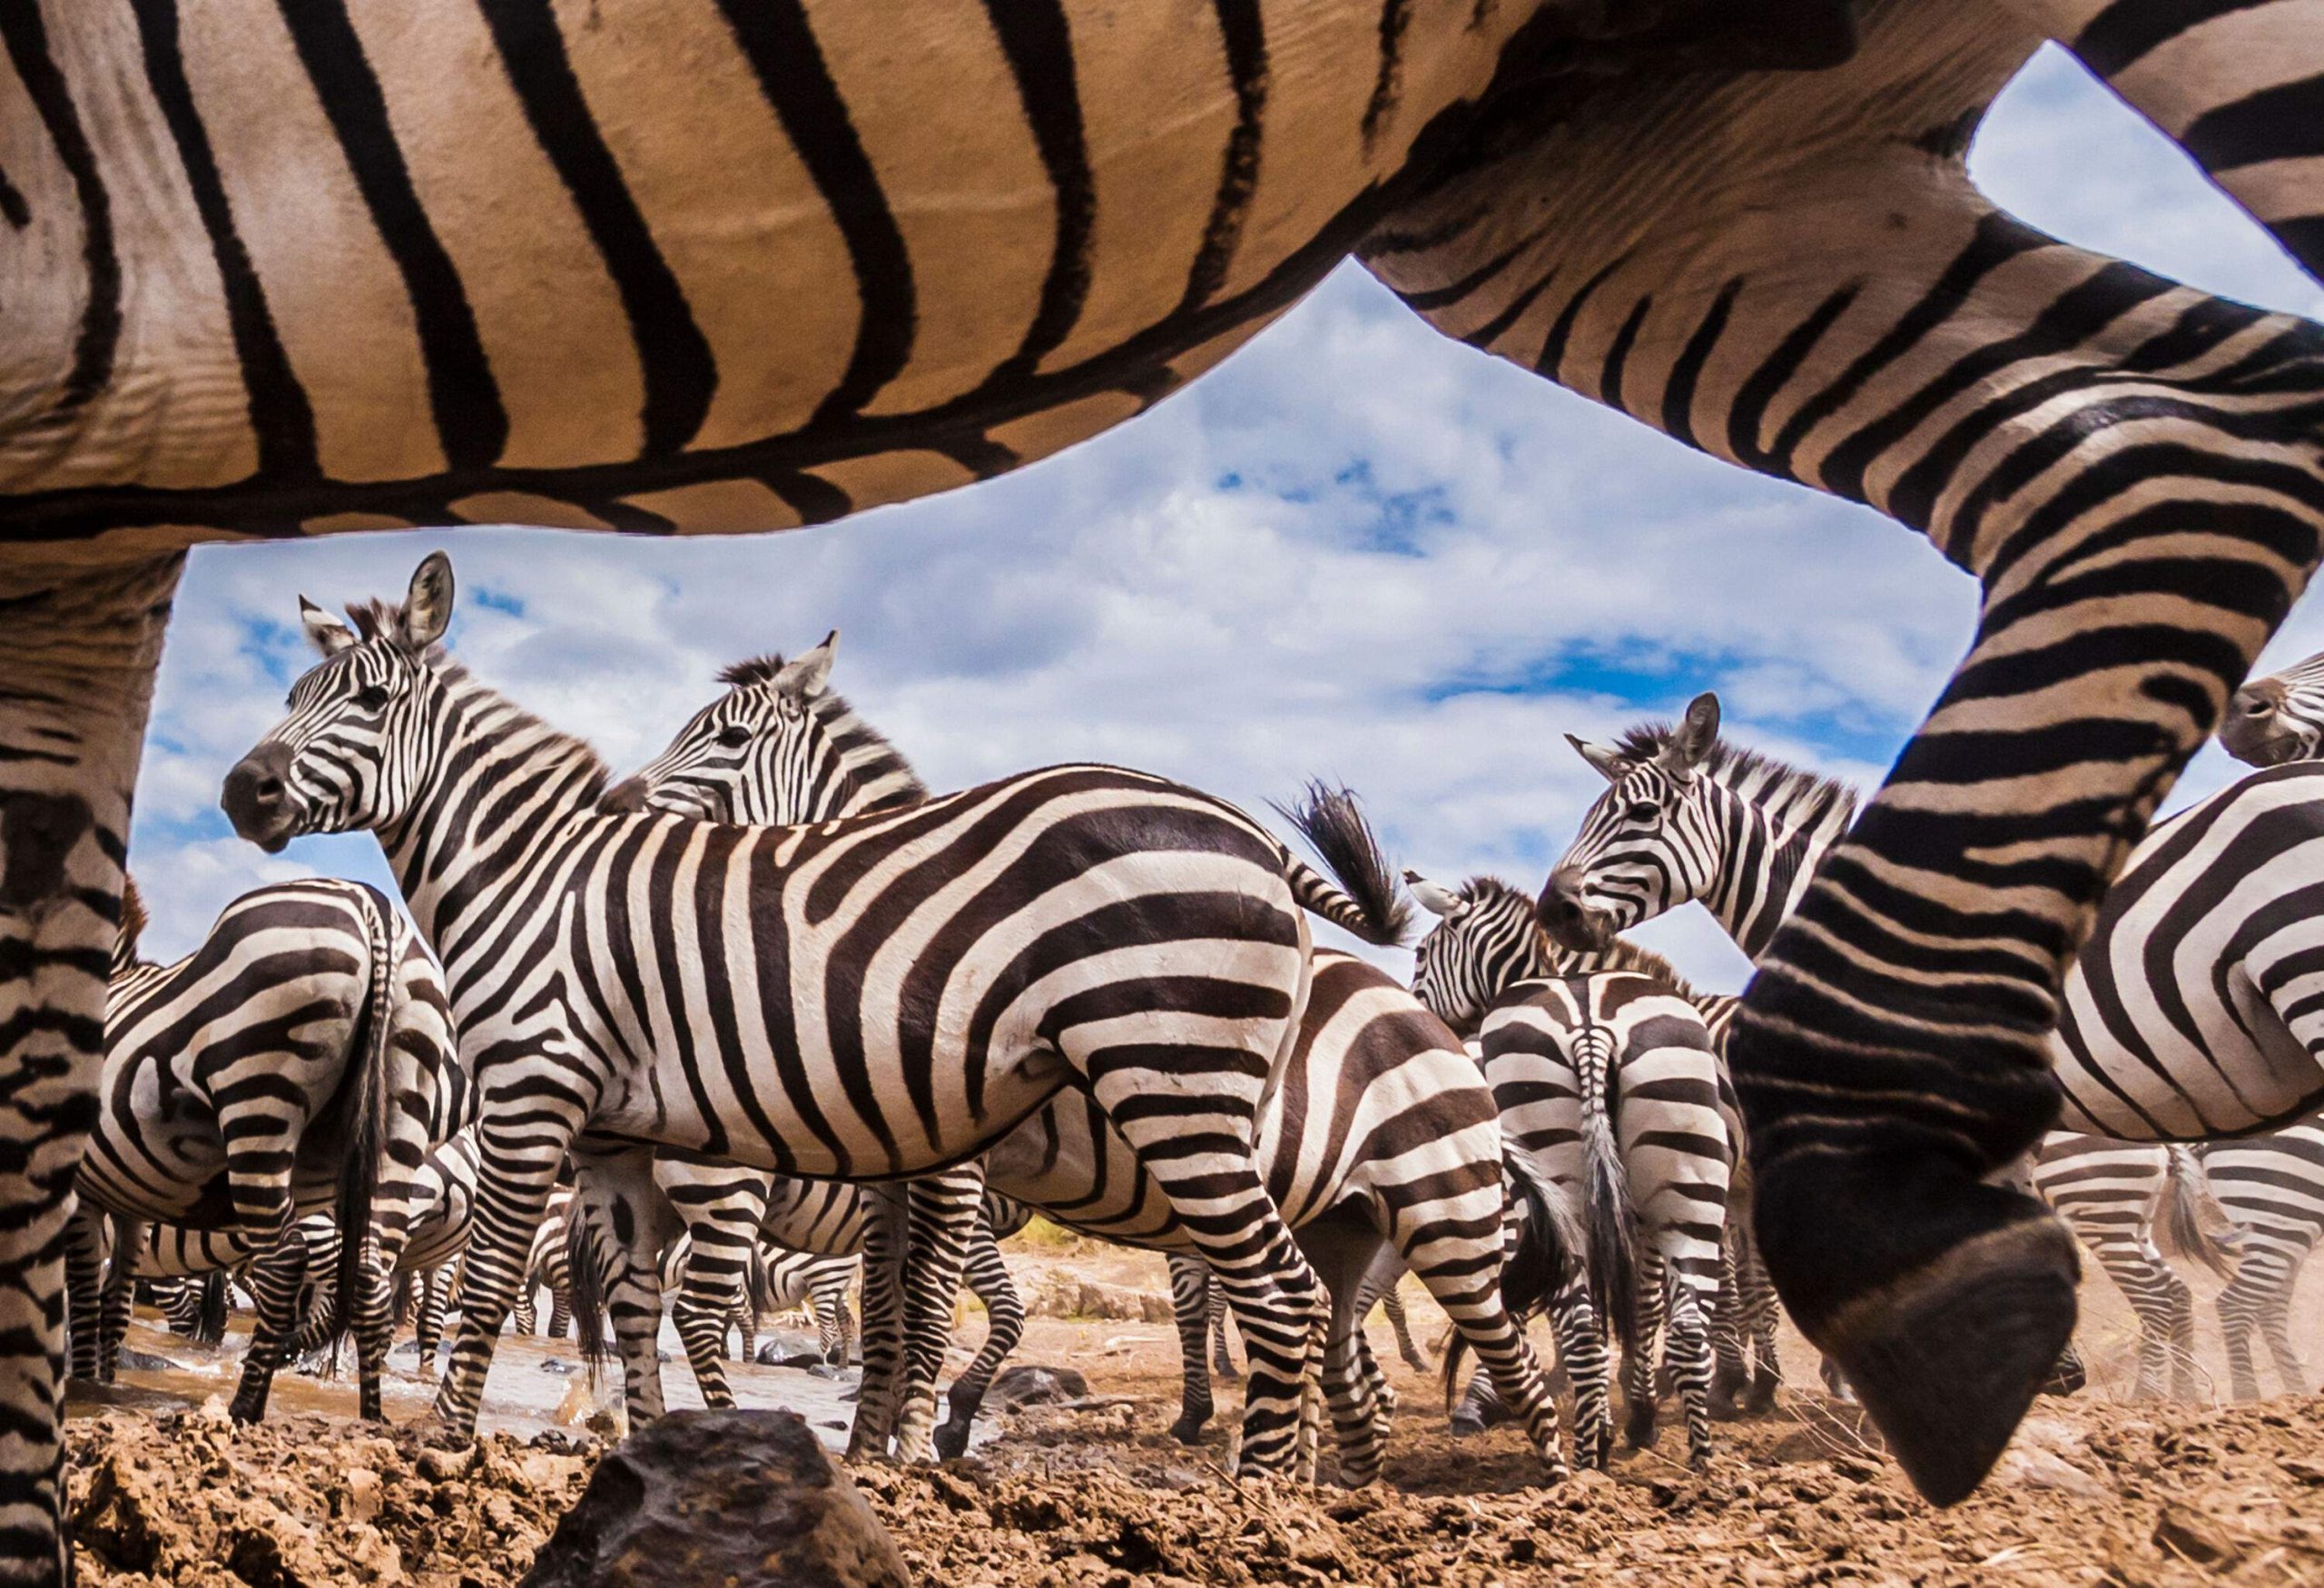 A herd of zebras congregates on the Mara River bank, as seen from a lower perspective, their striking black and white stripes contrasting beautifully against the golden savannah and the blue sky above.